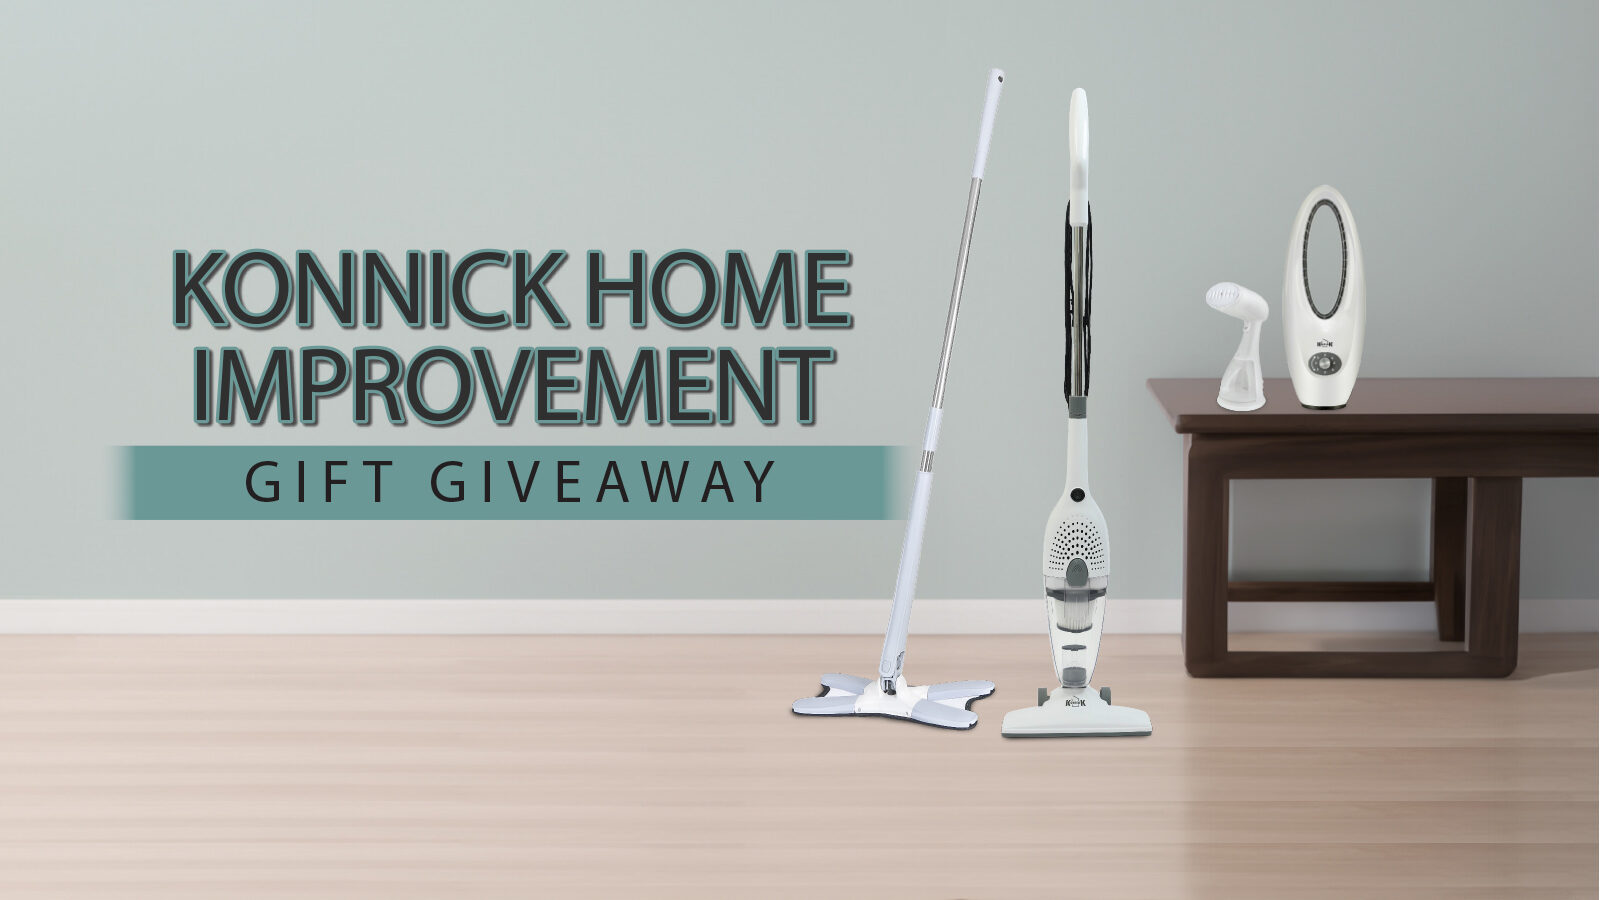 Konnick Home Improvement Gift Giveaway